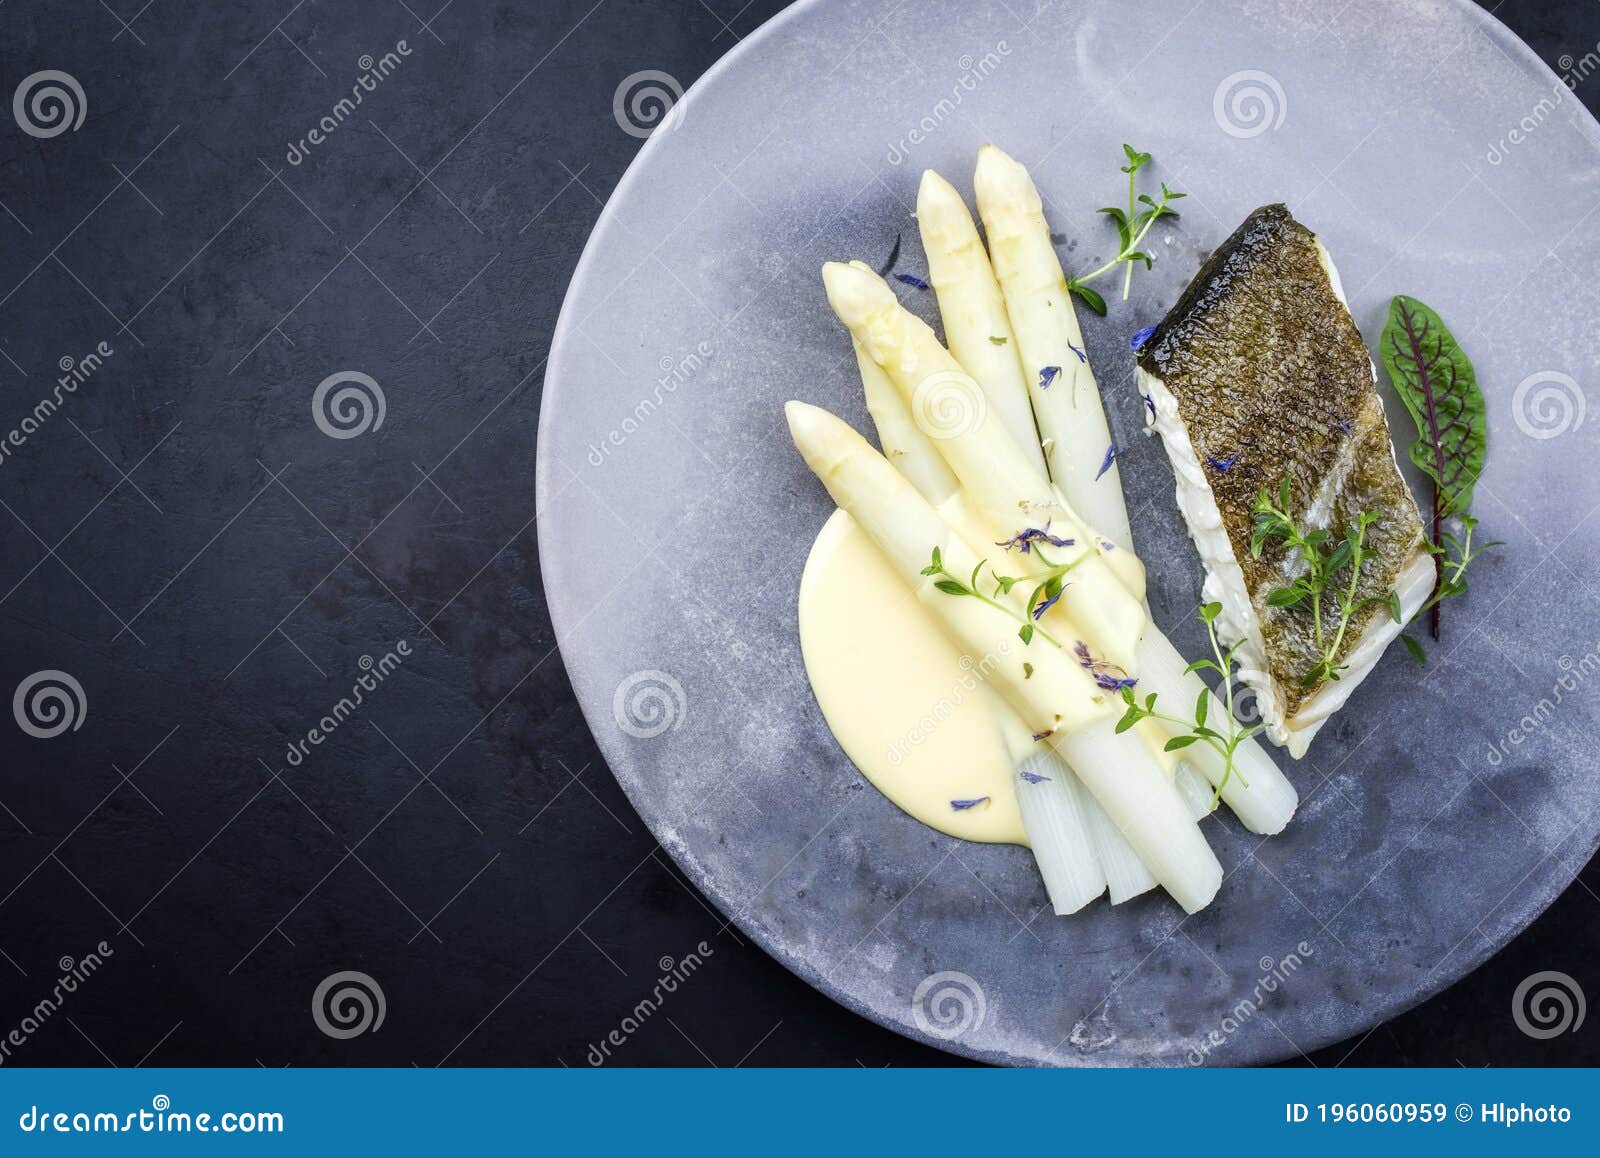 Modern Style Fried Gourmet Skrei Cod Fish Filet with White Asparagus ...